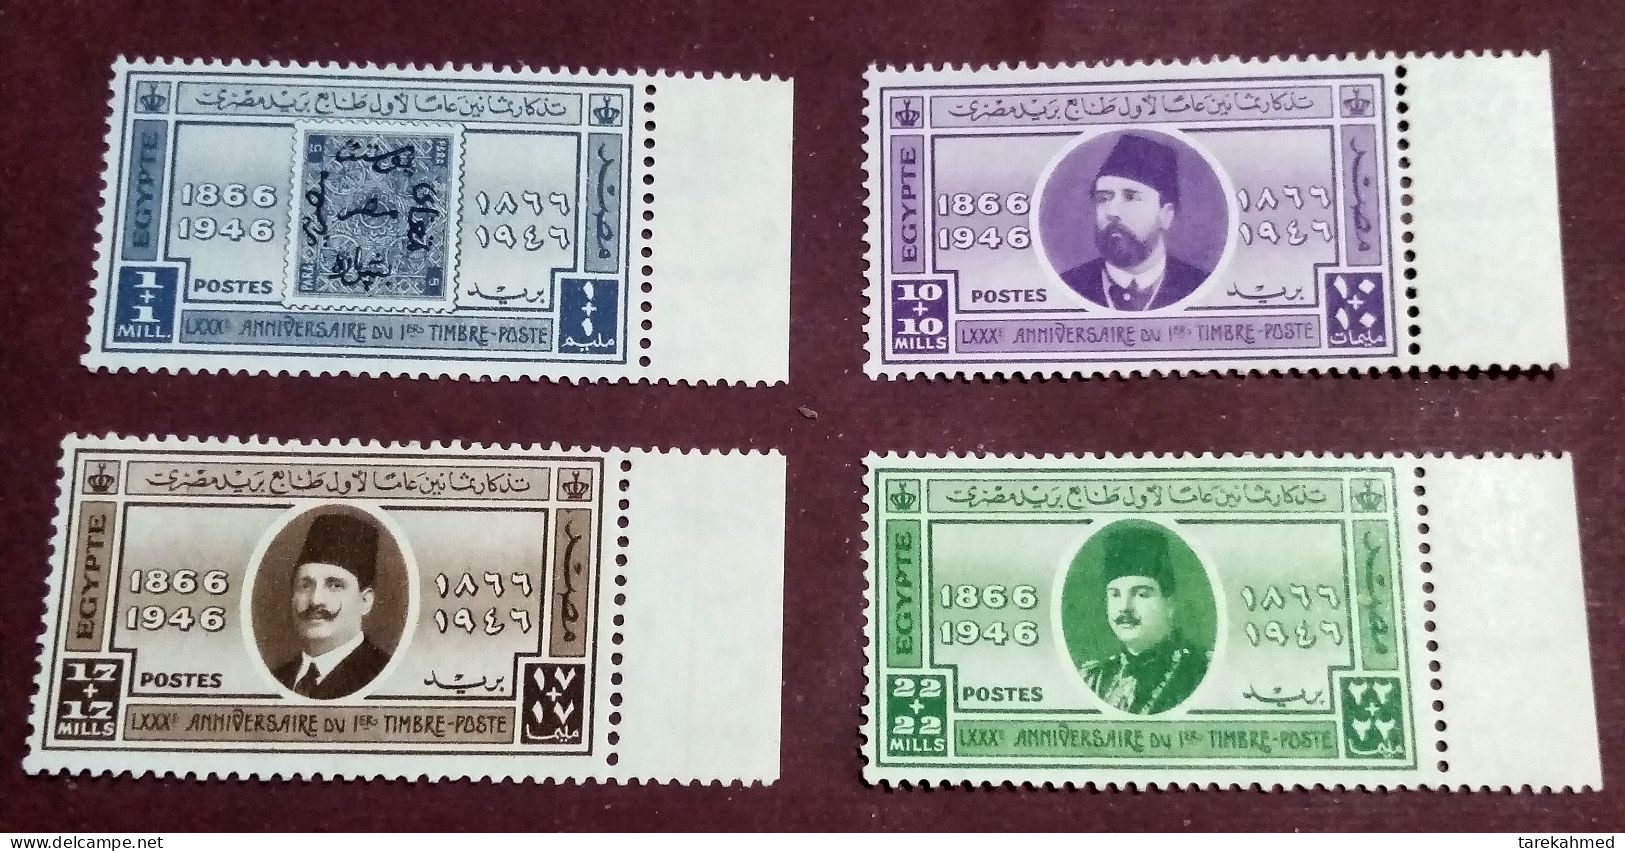 Egypt 1946 - Complete Set Of The 80th Anniv. Of Egypt’s 1st Postage Stamp - MNH With Margin, Original Gum. - Nuovi